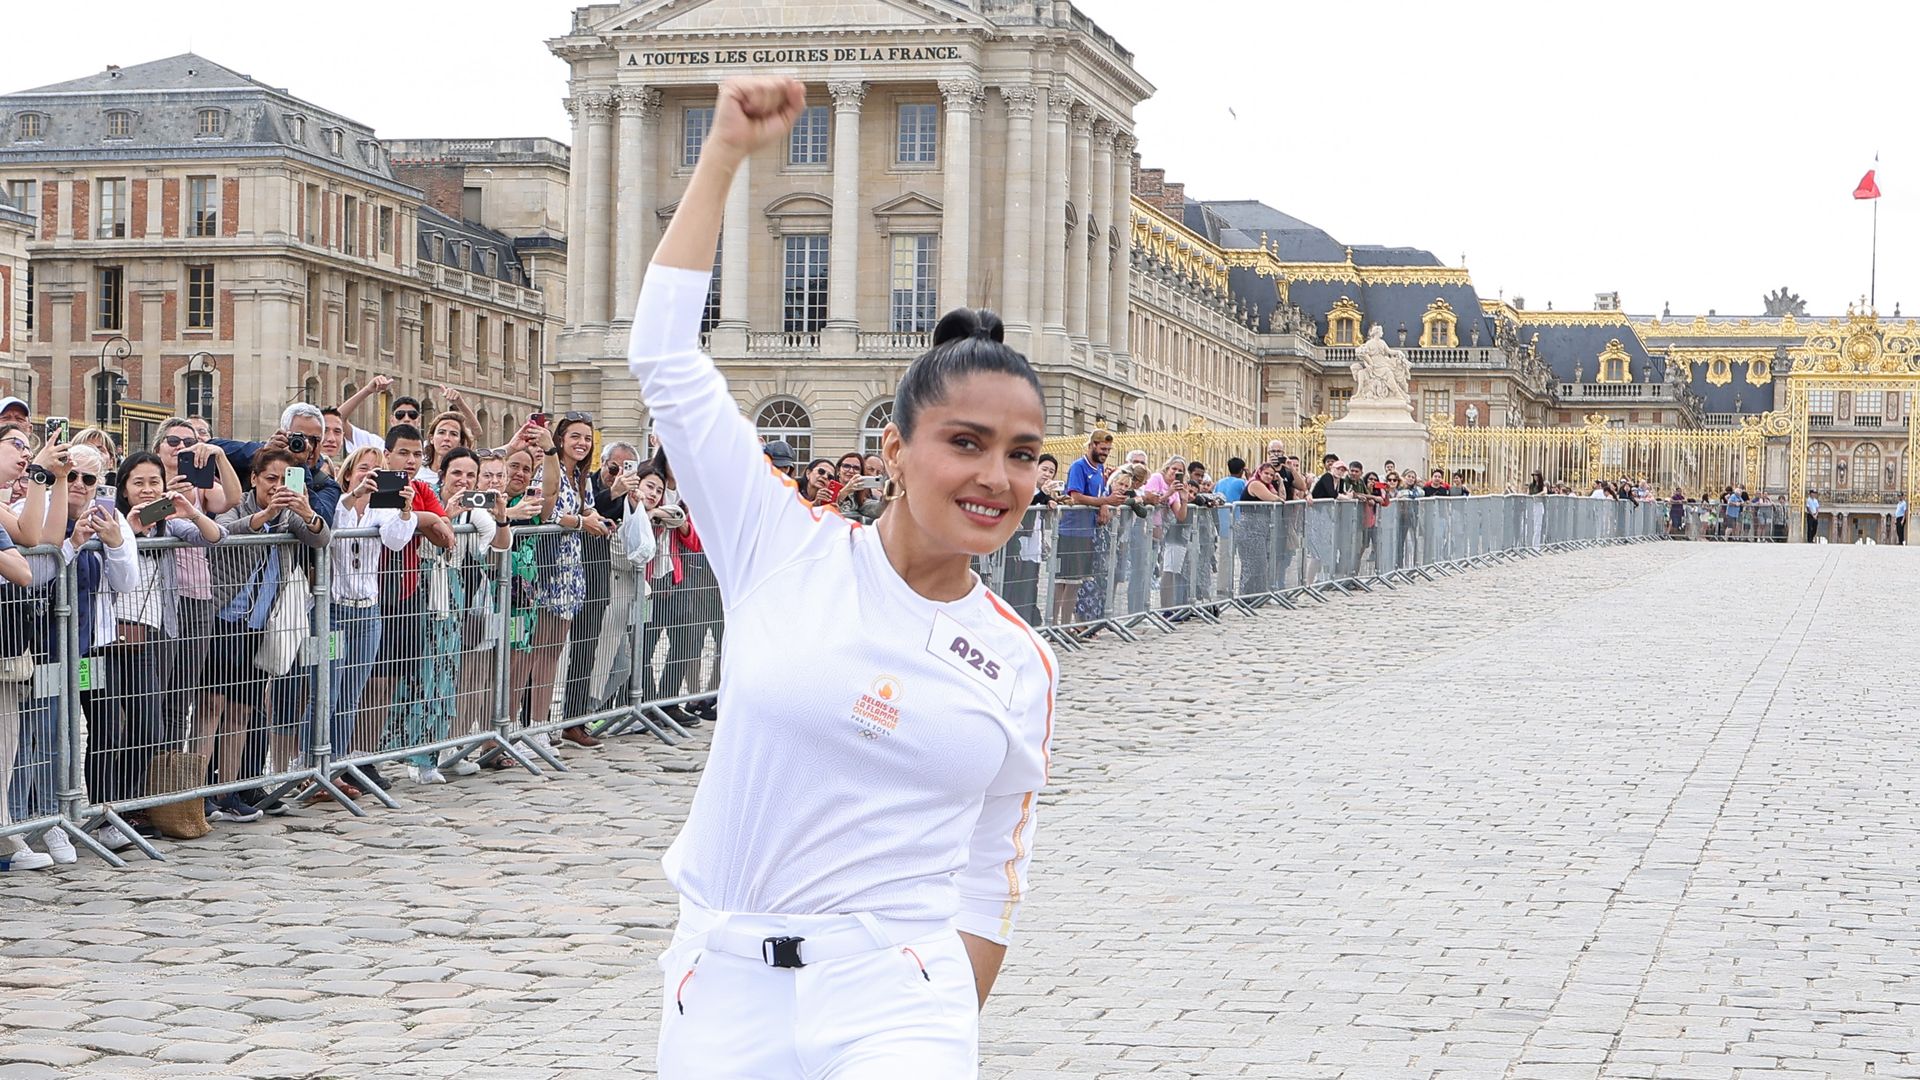 Salma Hayek is the latest celebrity to carry the Olympic torch ahead of Opening Ceremony